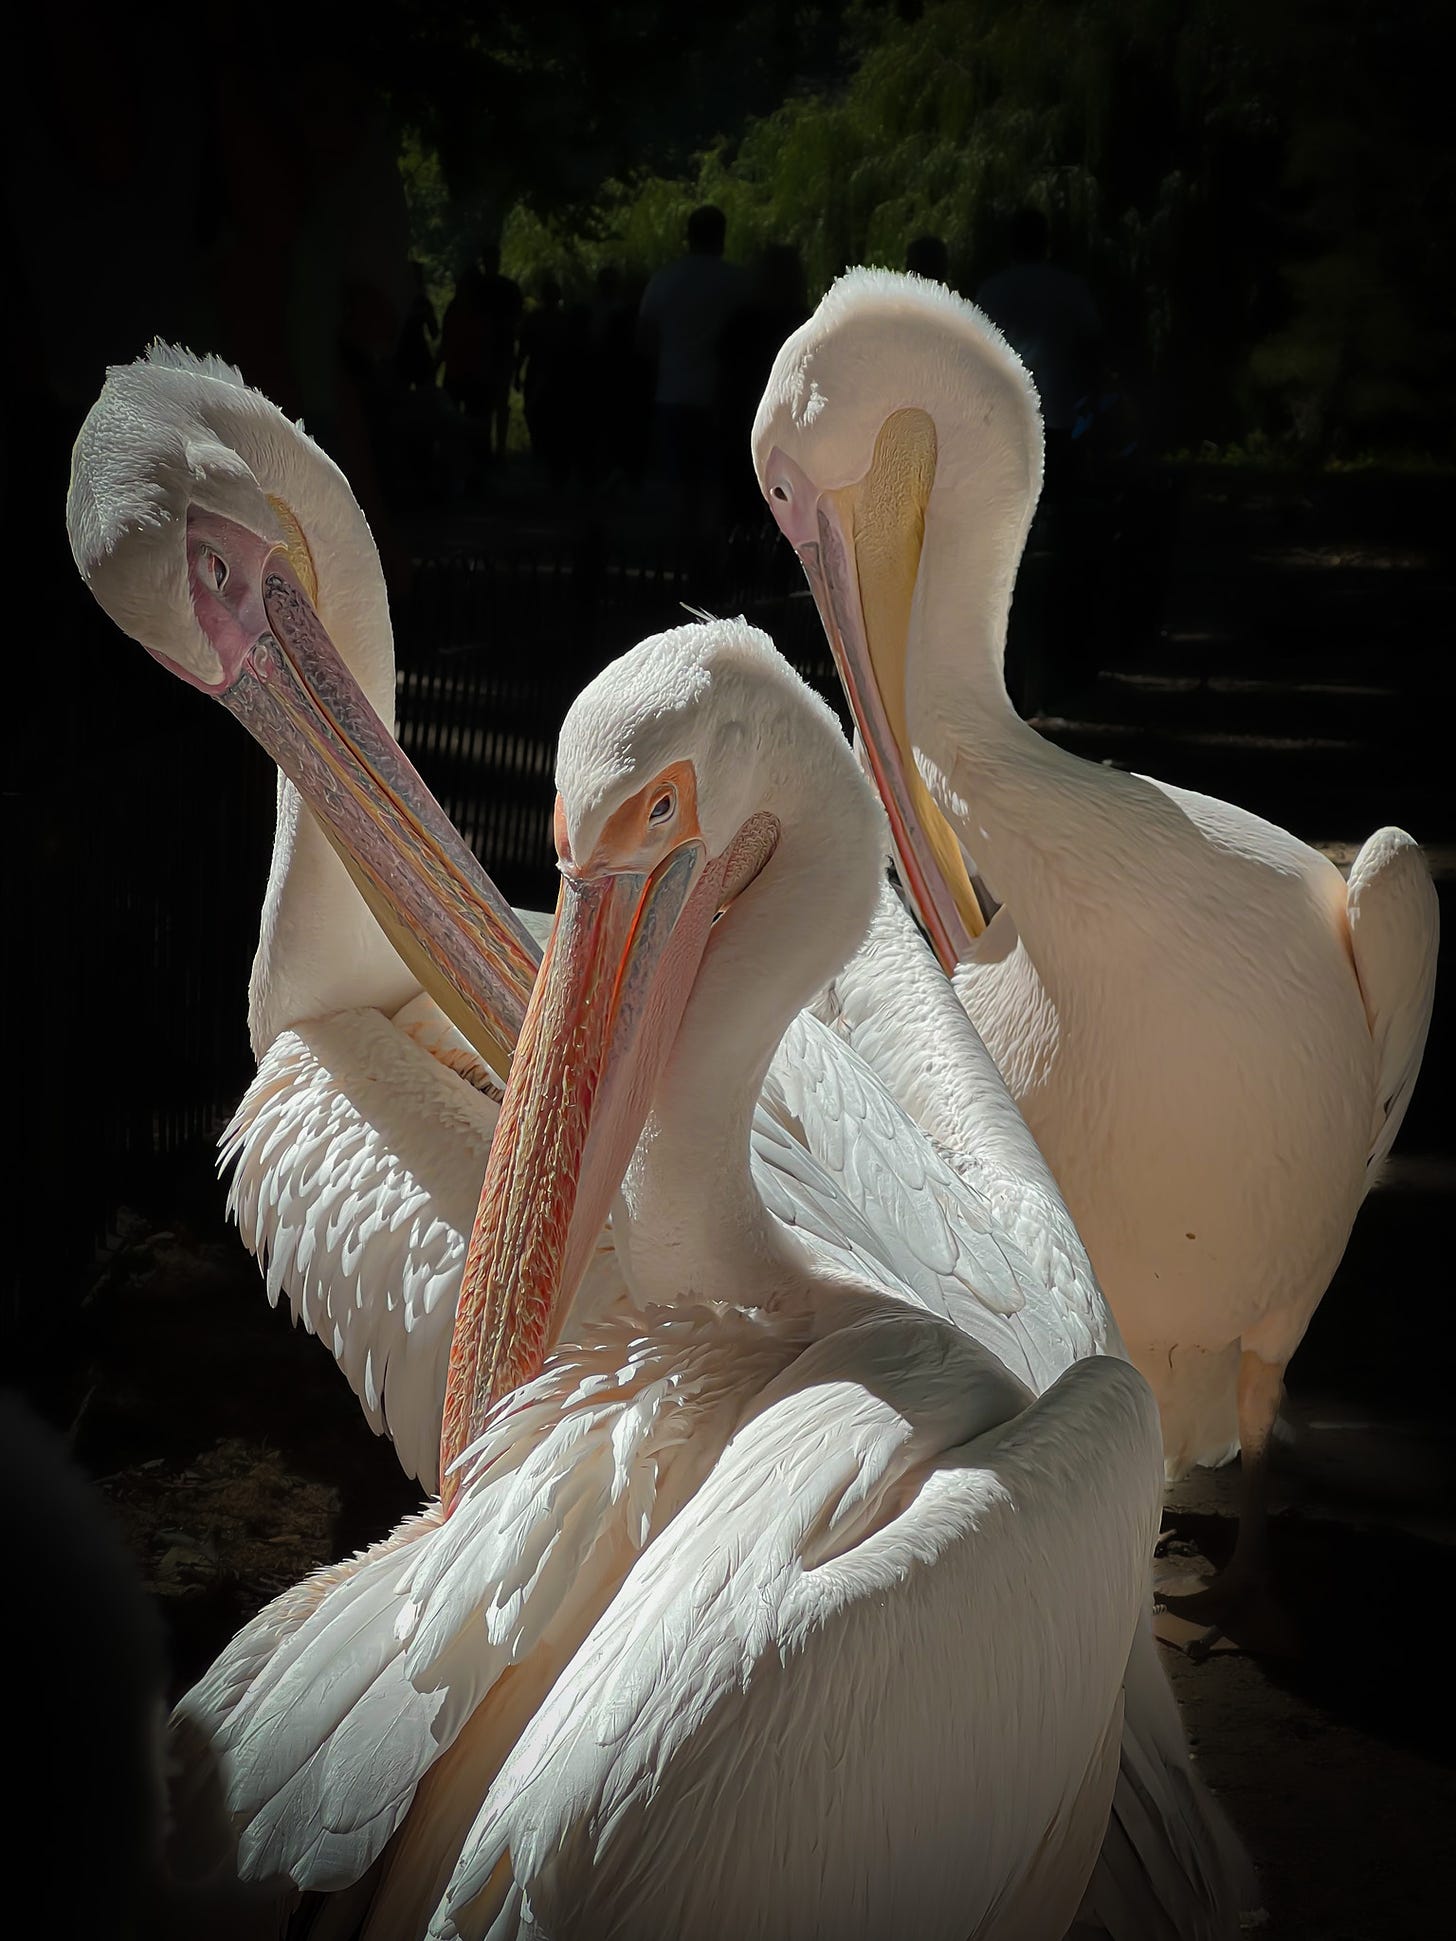 Three white pellican standing close together with a dark background